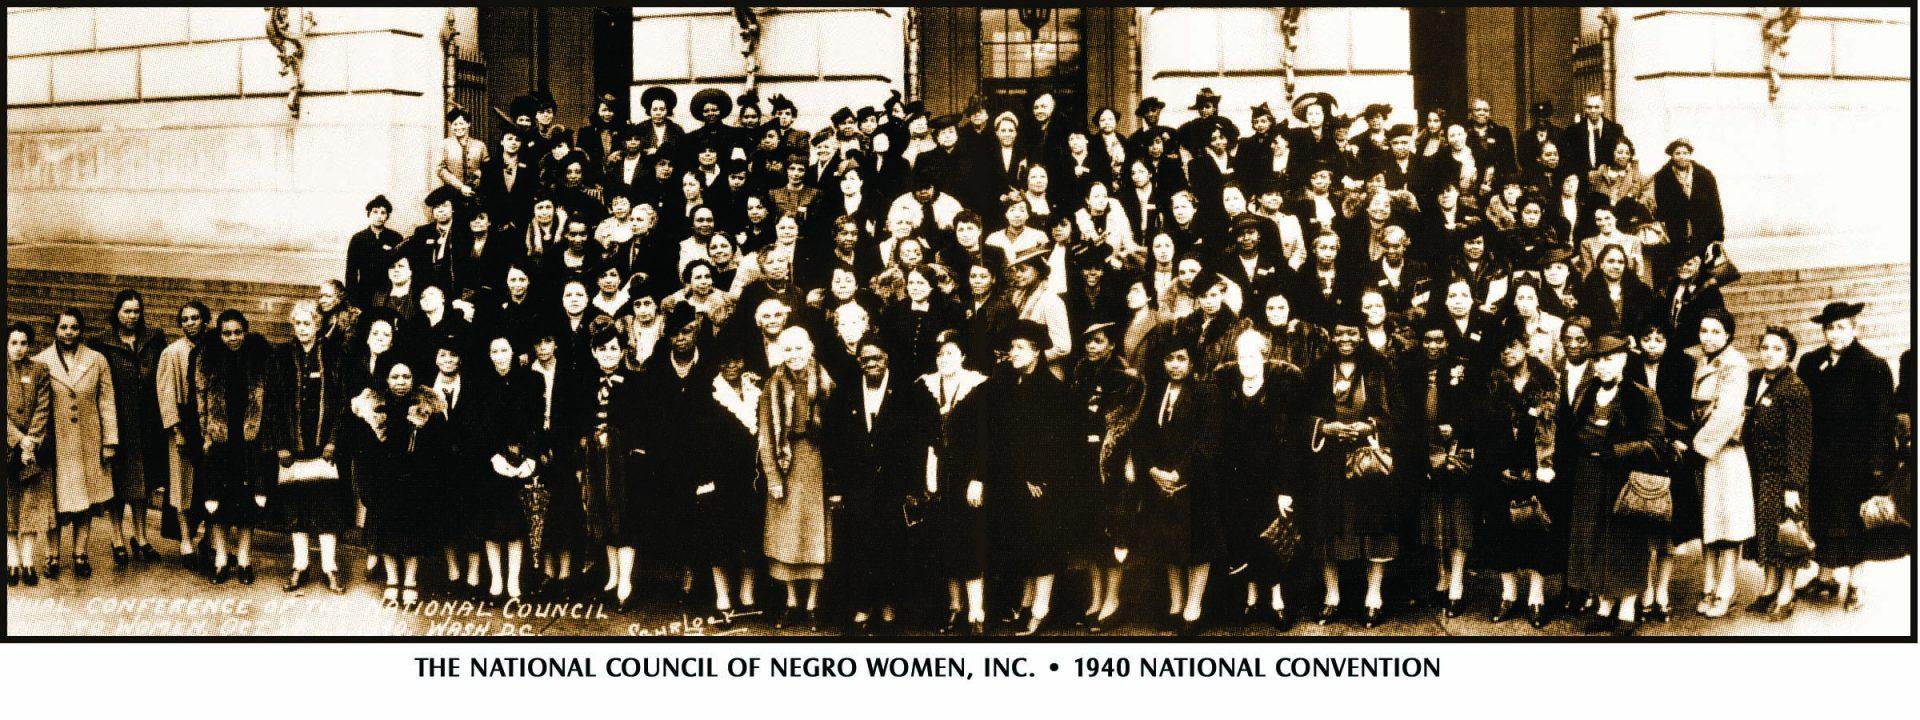 Group Photo from NCNW 1940 national convention